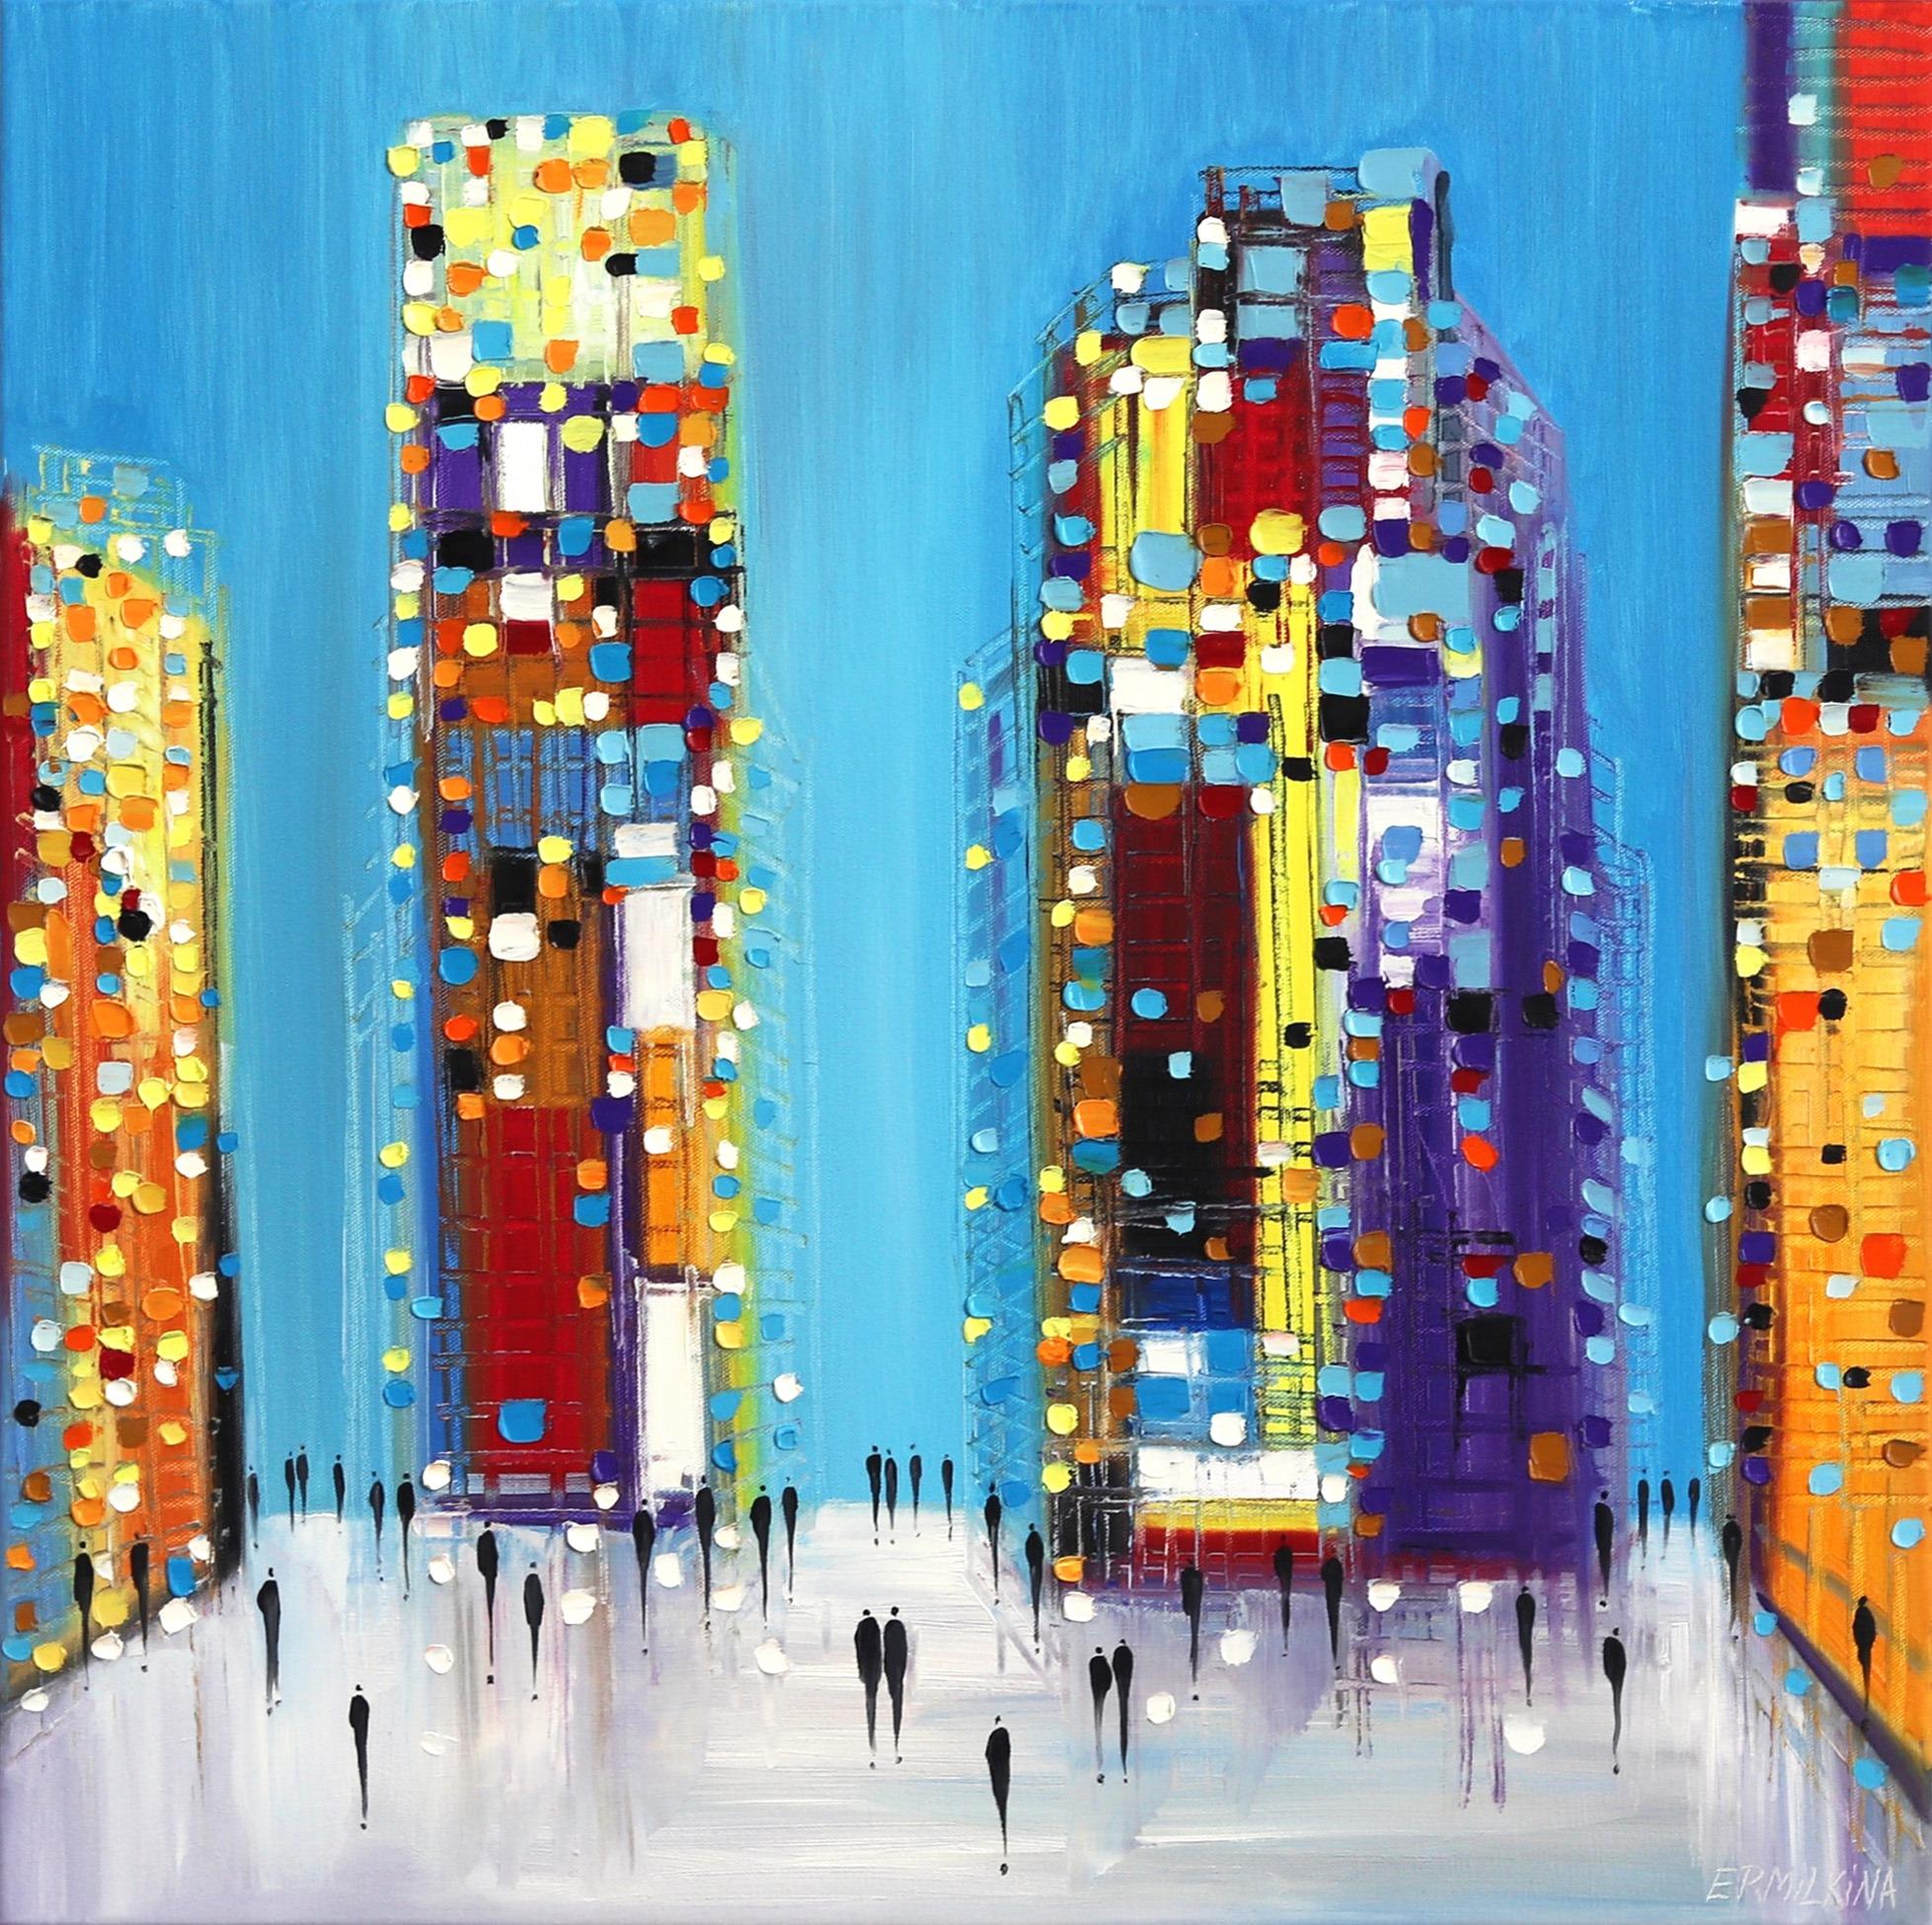 Once In The City - Colorful Original Oil Painting